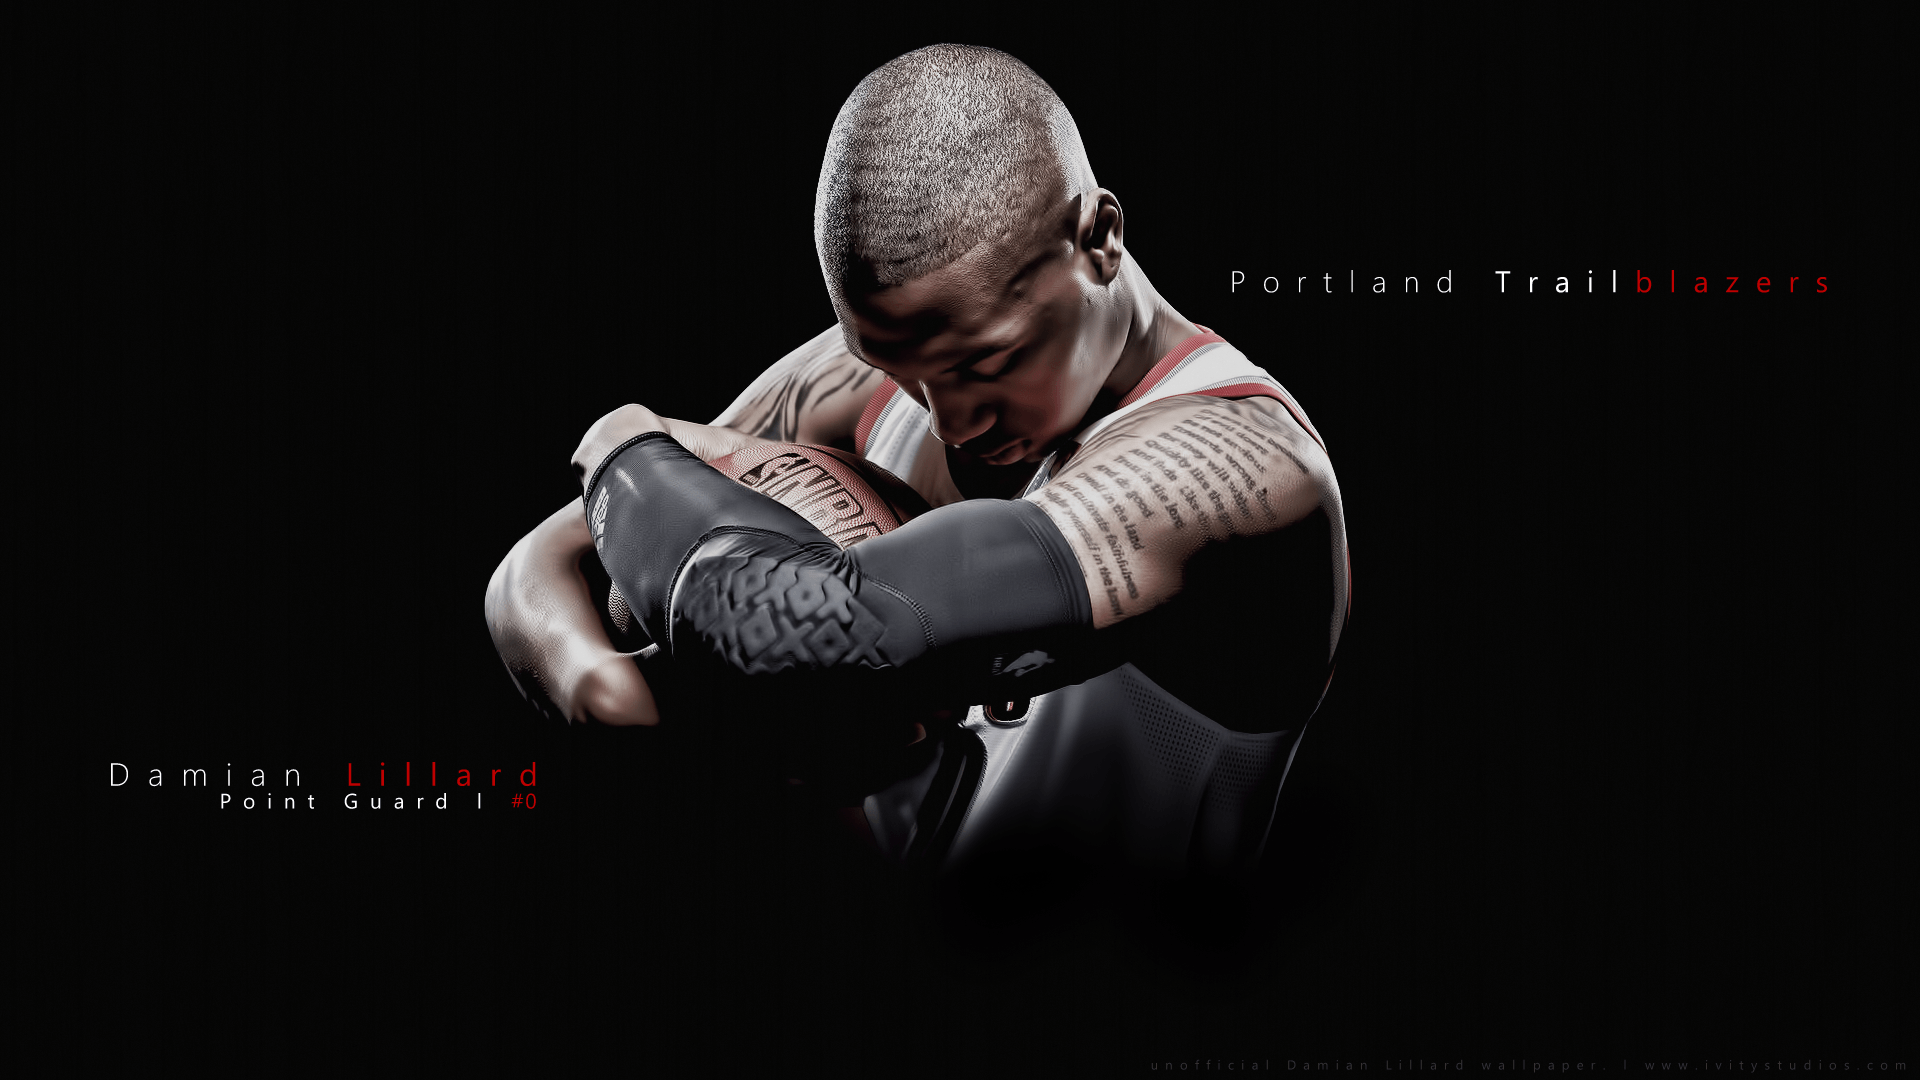 Damian Lillard Wallpaper for mobile phone tablet desktop computer and  other devices  Sports illustrations design Sports design ideas Sports  design inspiration